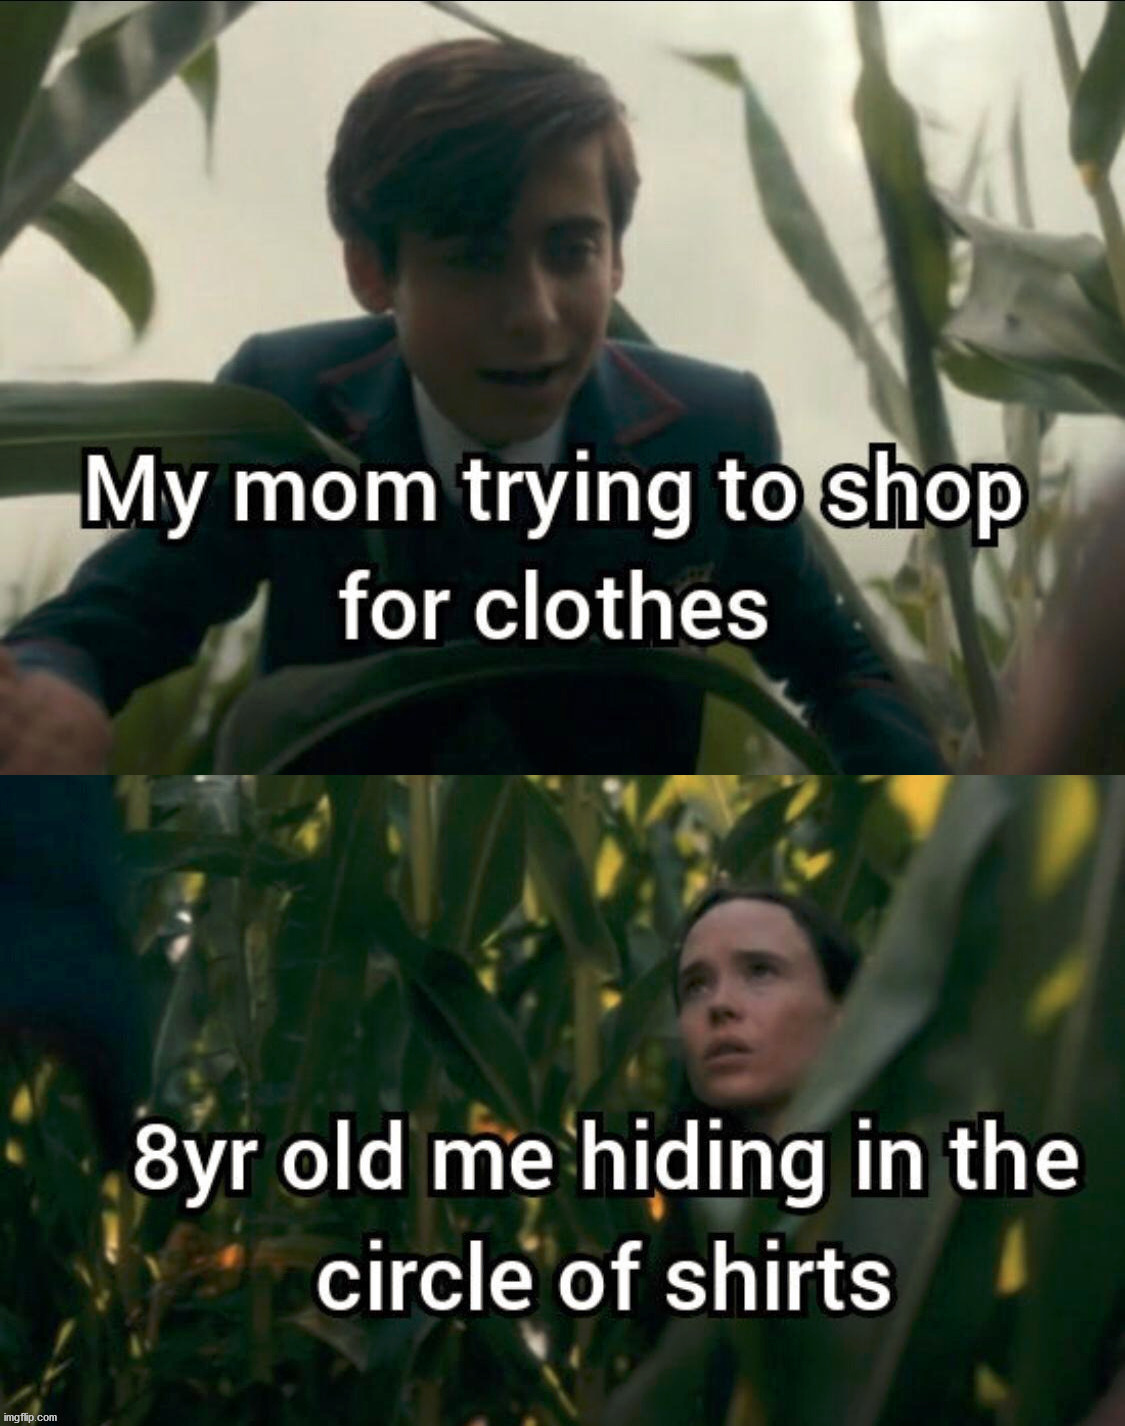 Who else hid in the clothes racks? | image tagged in memes,mom,hide | made w/ Imgflip meme maker